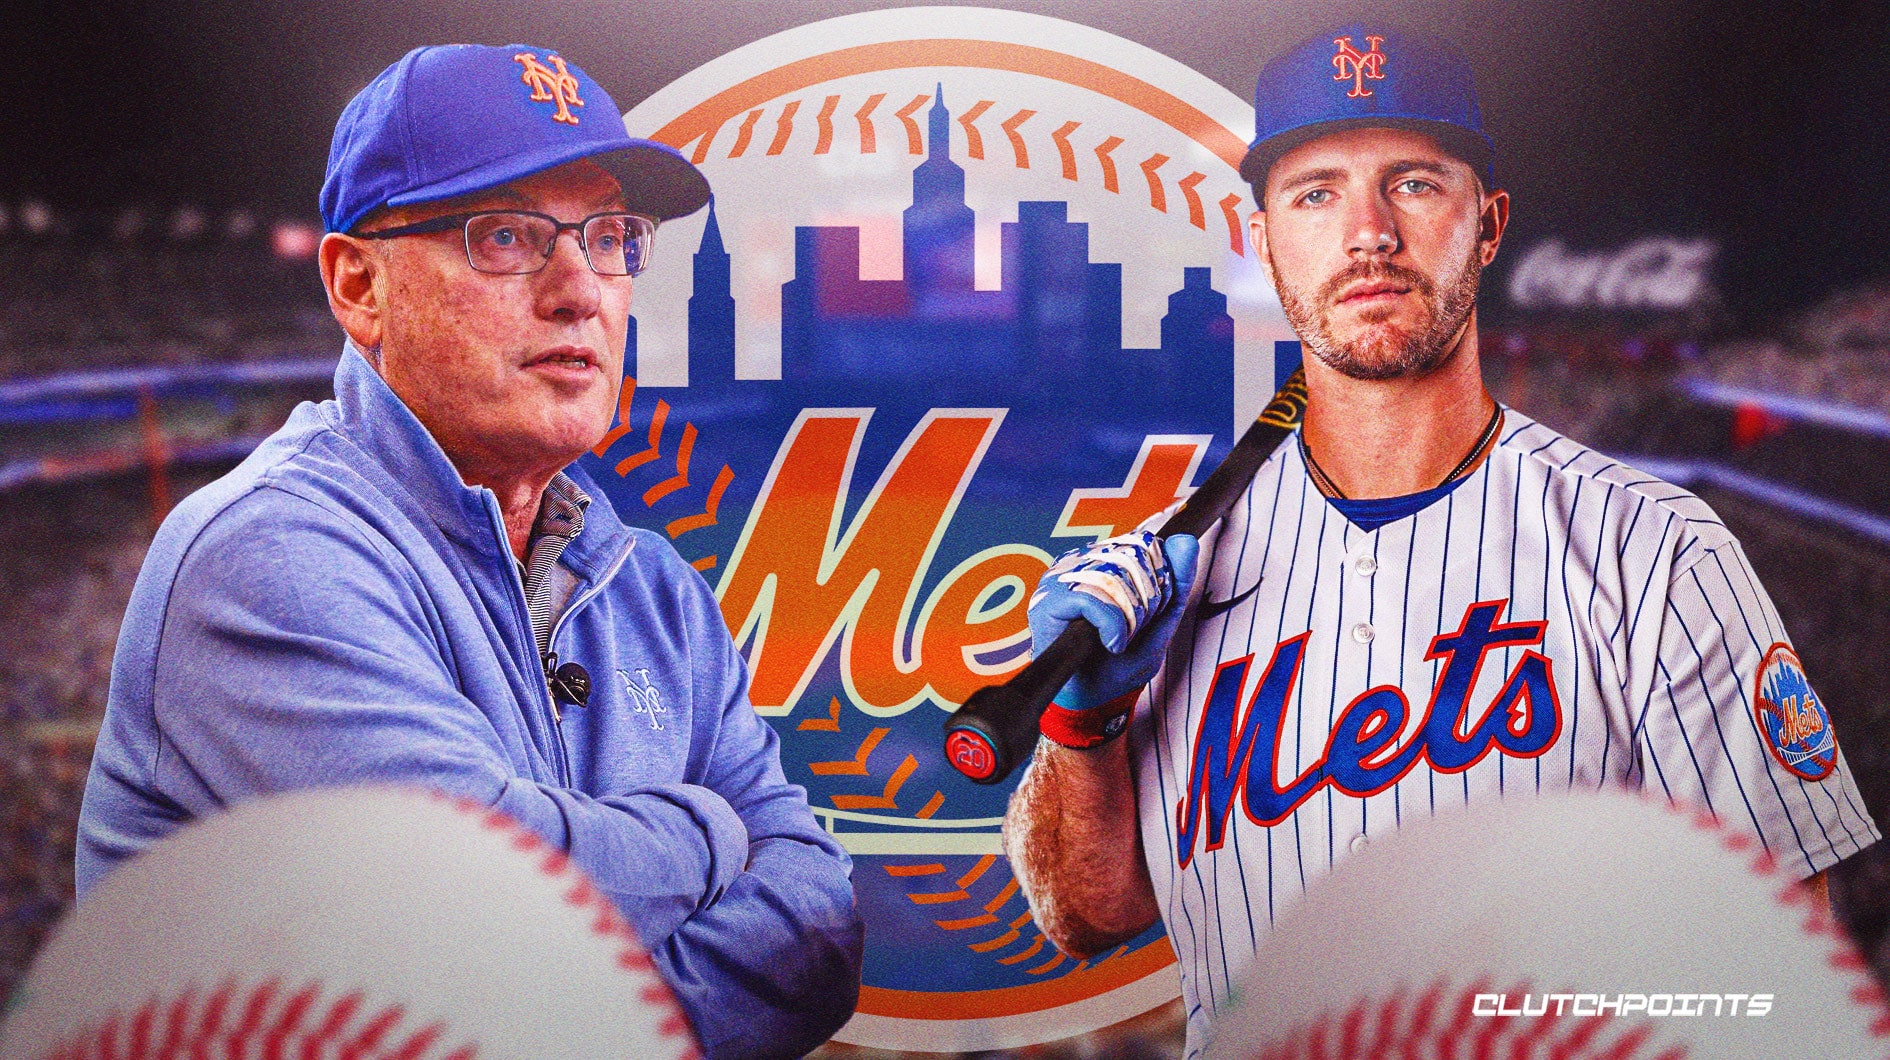 mlb rumors, pete alonso, mets, mets pete alonso, pete alonso trade